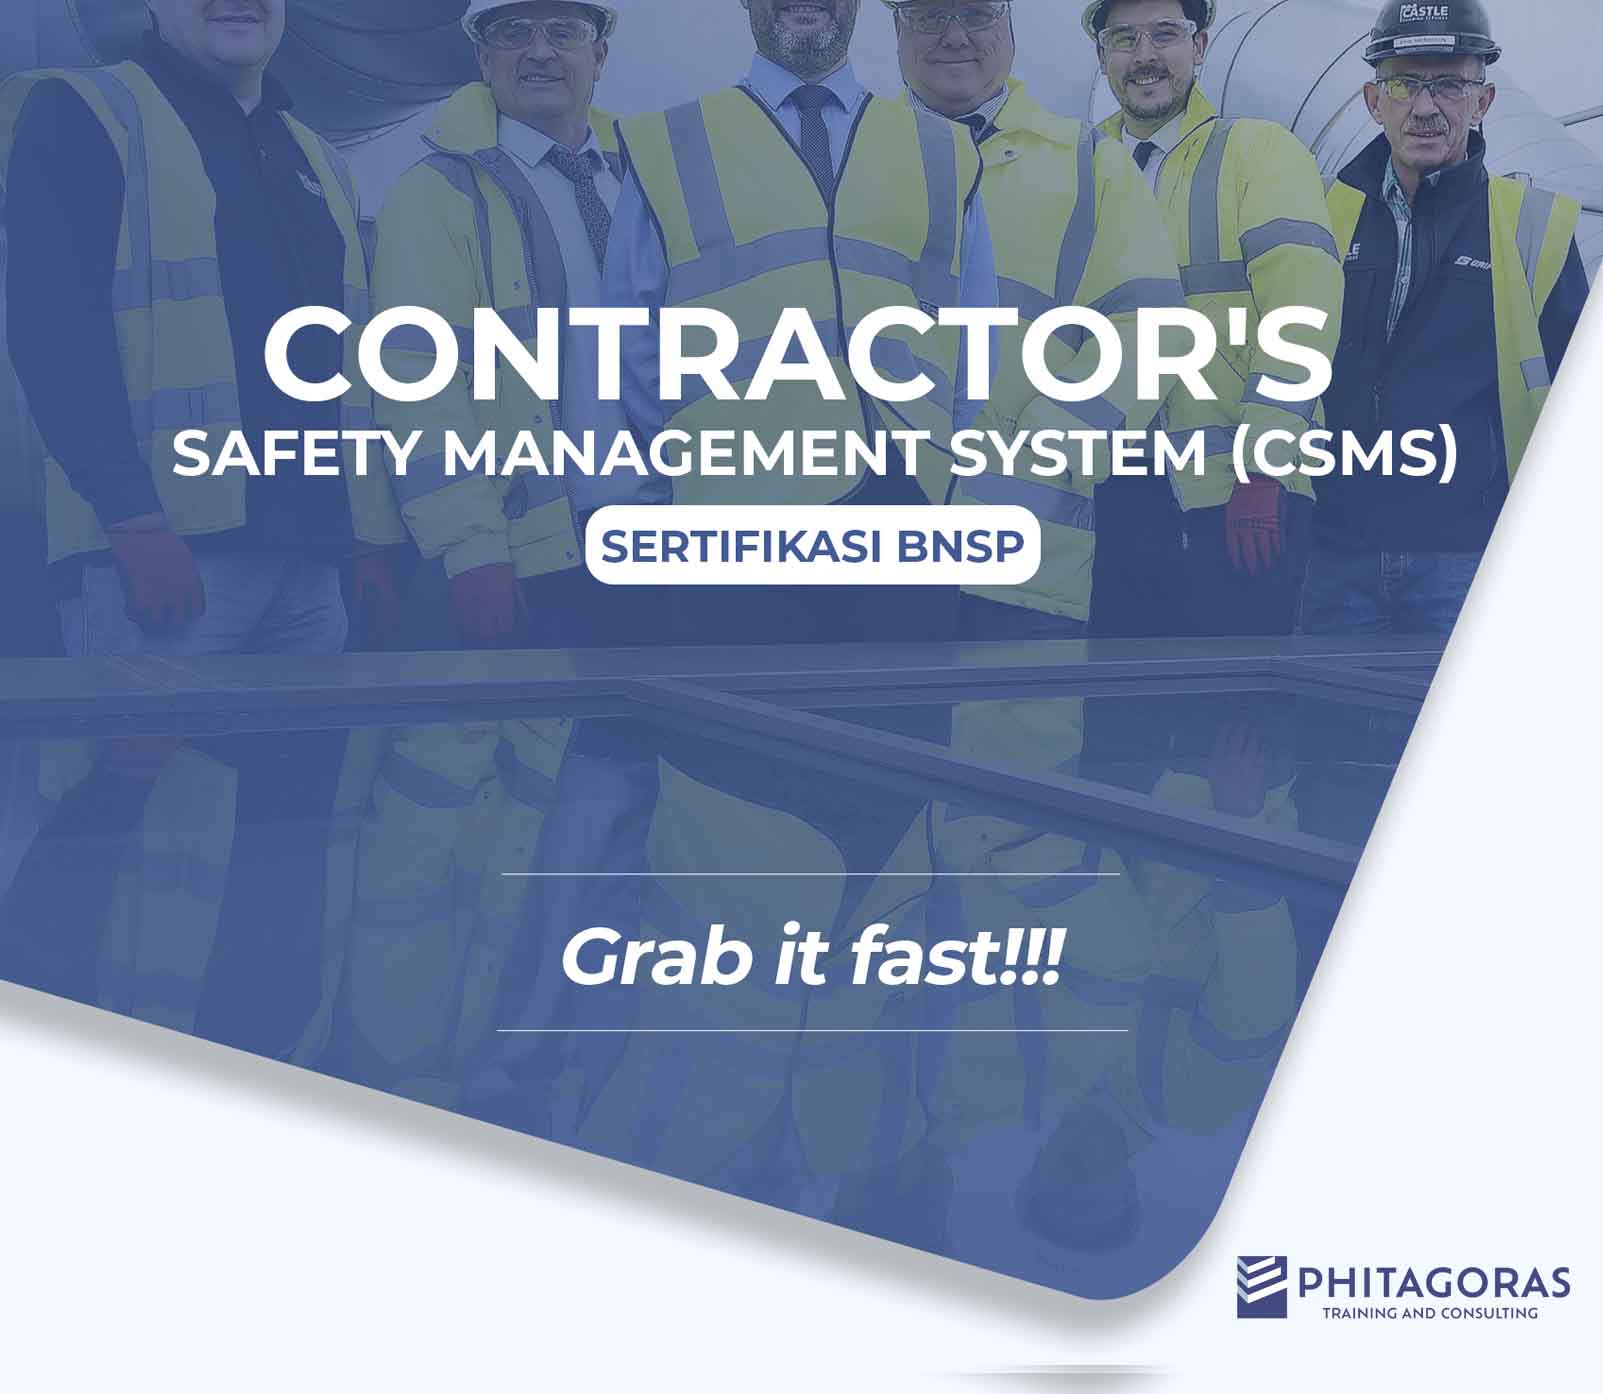 Training Contractor's Safety Management System